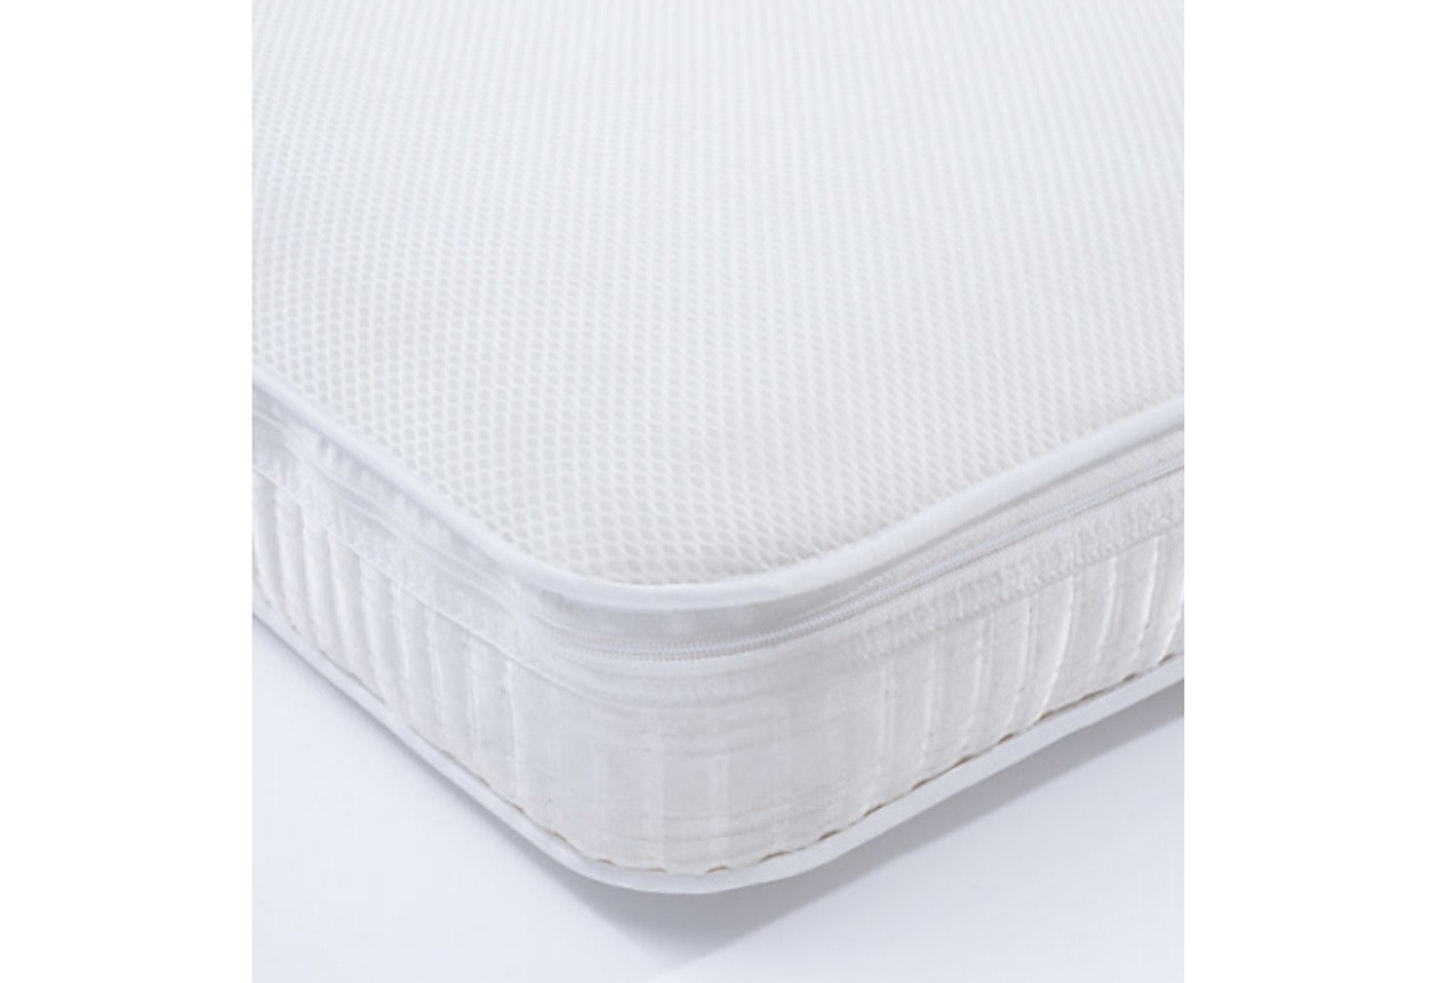 mothercare airflow pocket spring cot mattress review